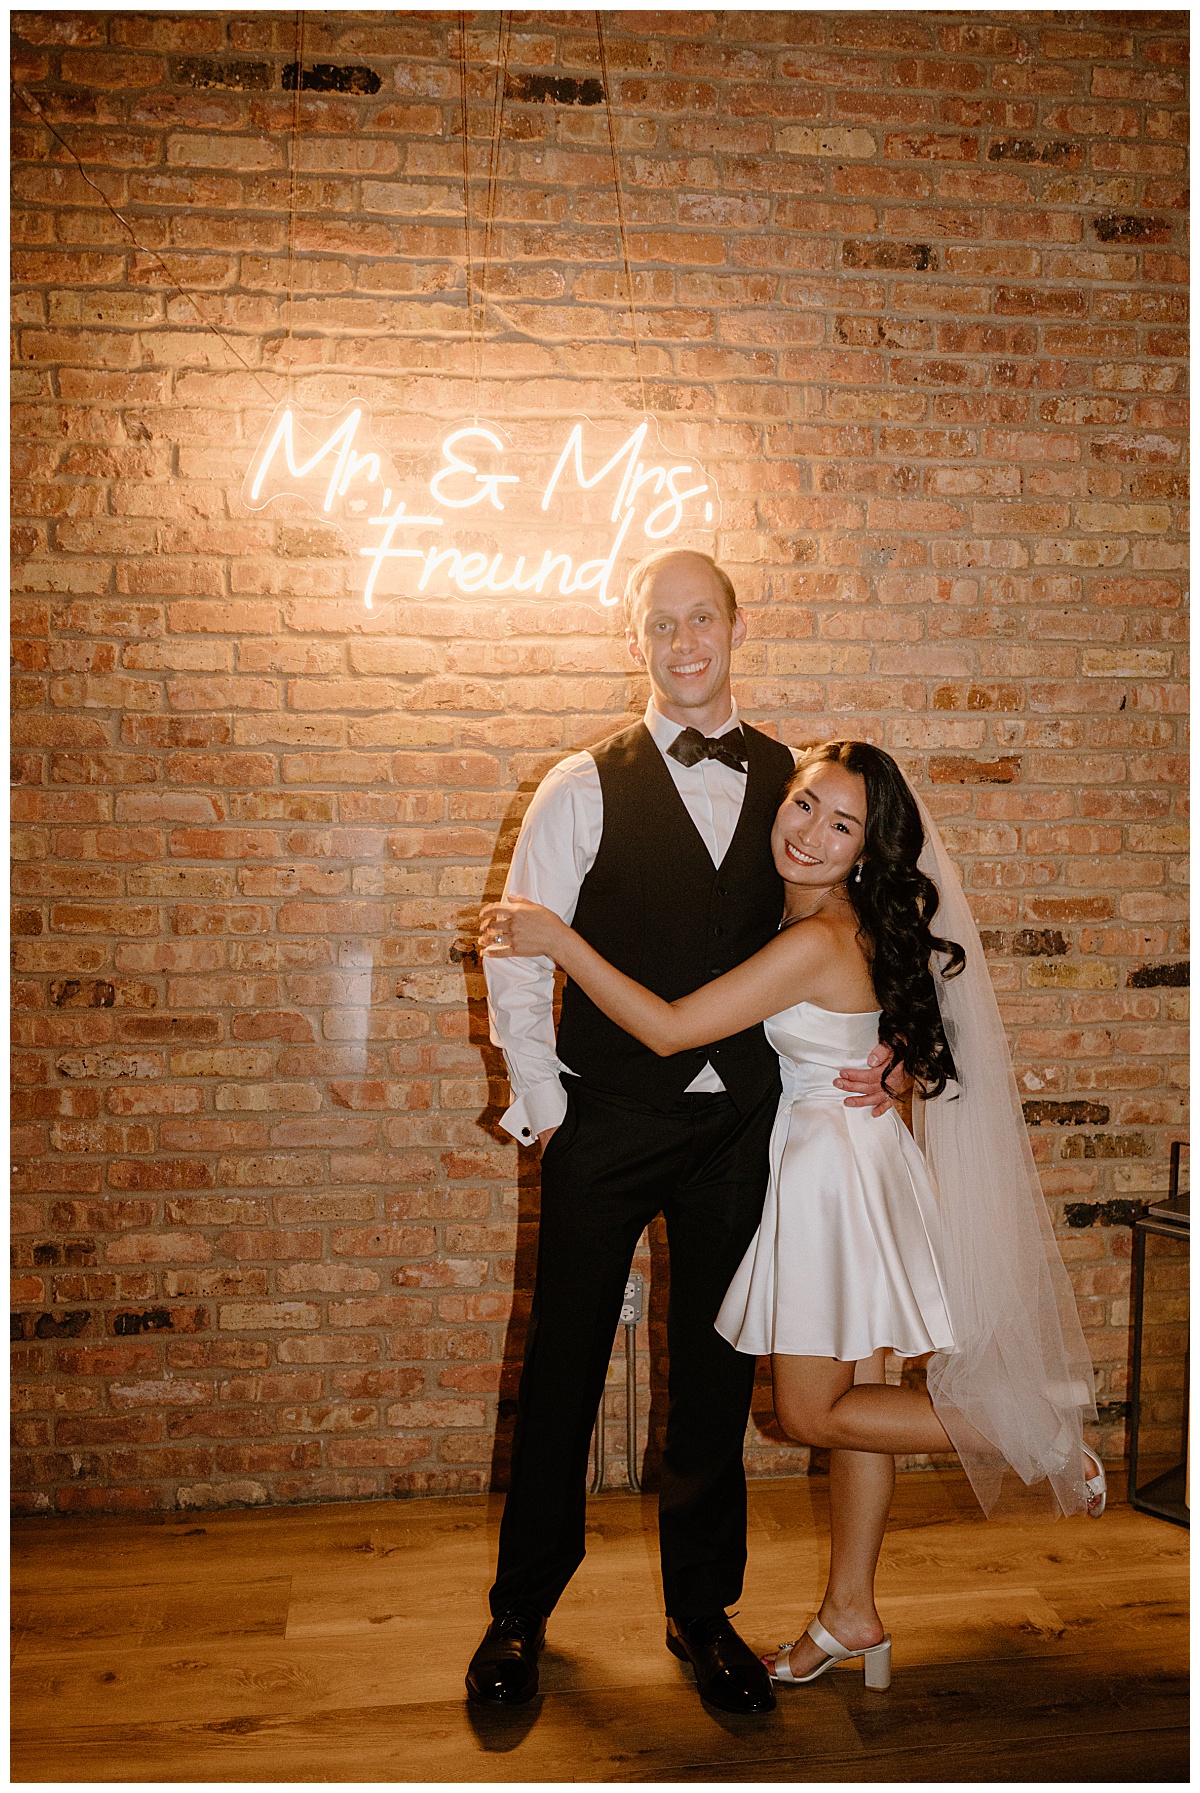 newlyweds hug under neon sign by  Indigo Lace Collective